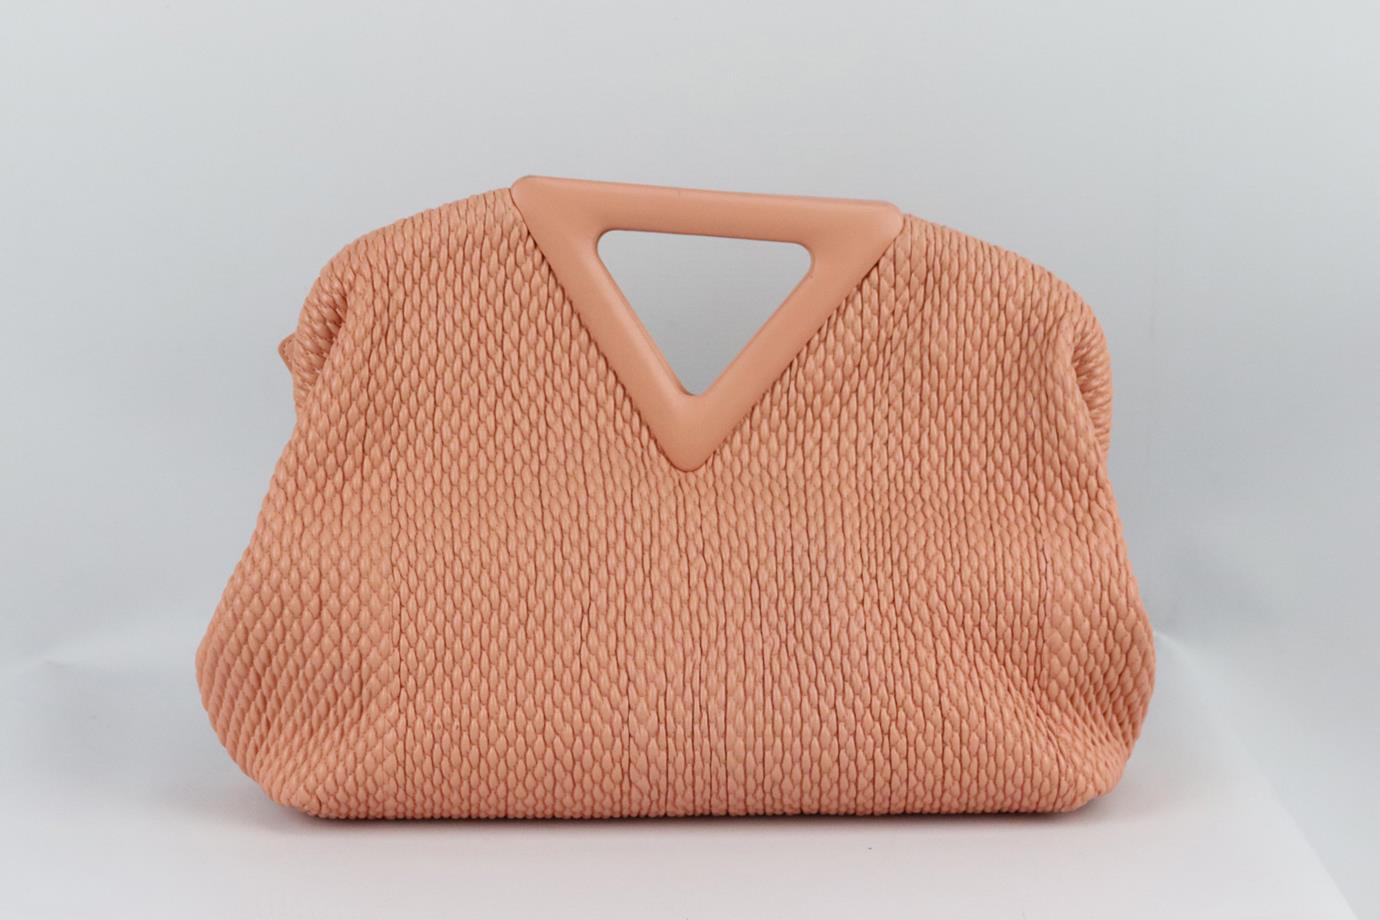 Bottega Veneta Point medium quilted leather tote bag. Made from peach-pink soft quilted leather with a structured magnetic frame, knotted shoulder strap and distinctive 'V' top handle. Peach. Magnetic fastening at top. Does not come with box or